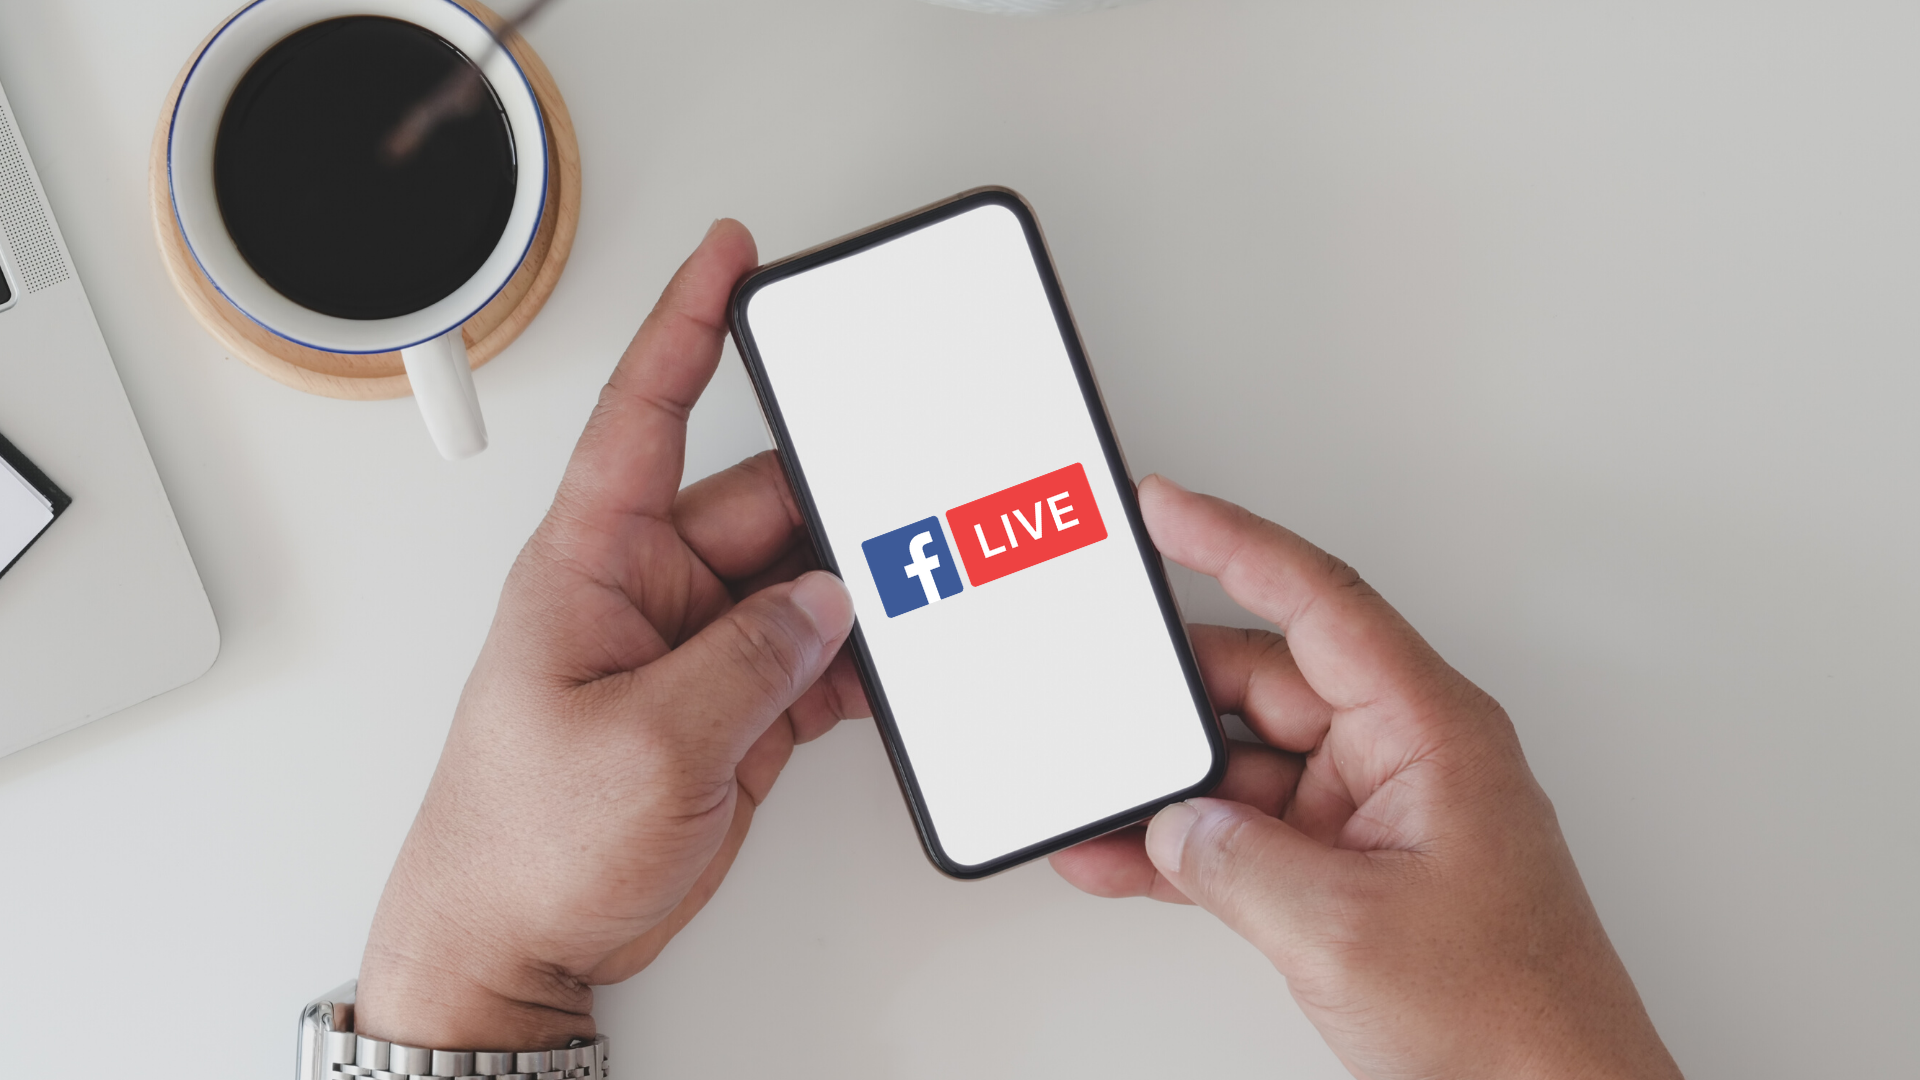 Facebook Focusing on Live Streaming, Video Streaming to TVs Soared 85% in U.S. and other top news